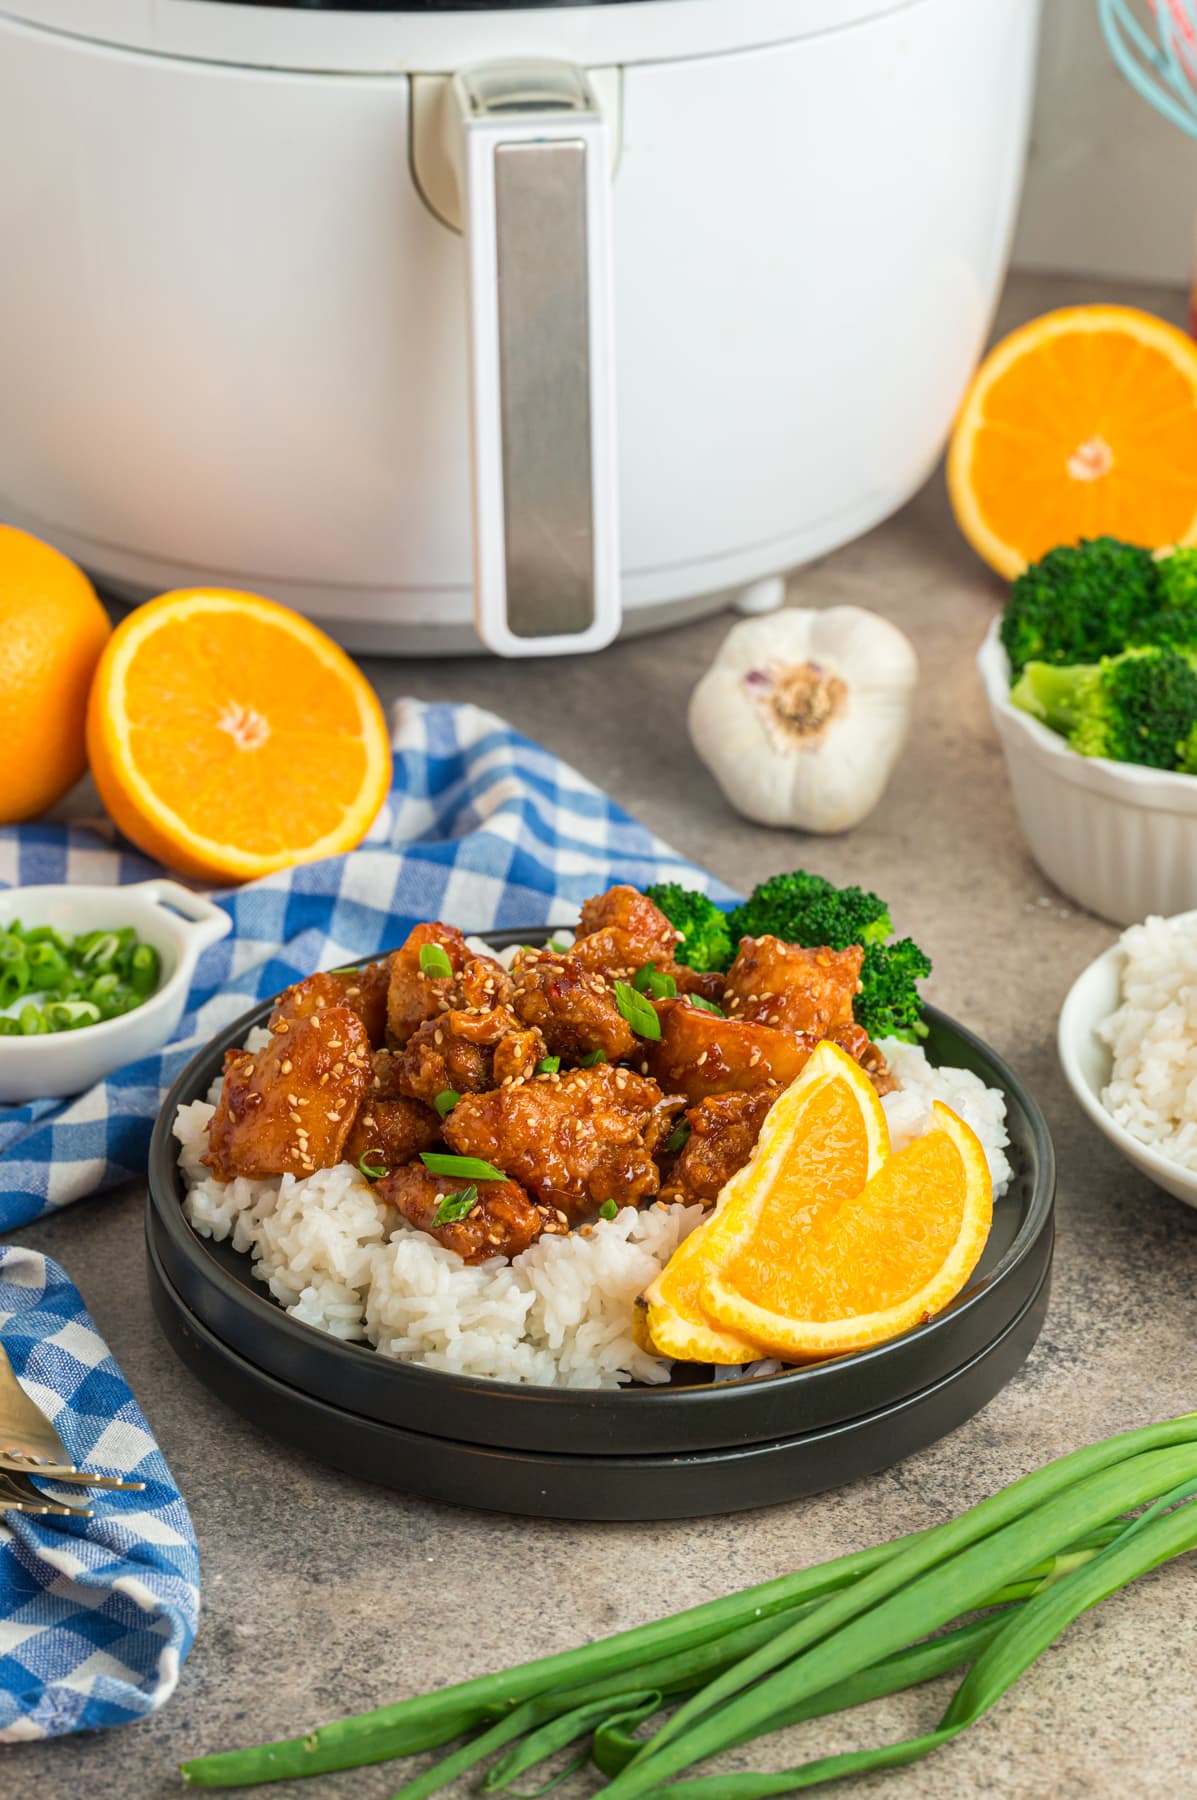 Orange chicken garnished with green onions on top of white rice on a dark plate sitting in front of a white air fryer.